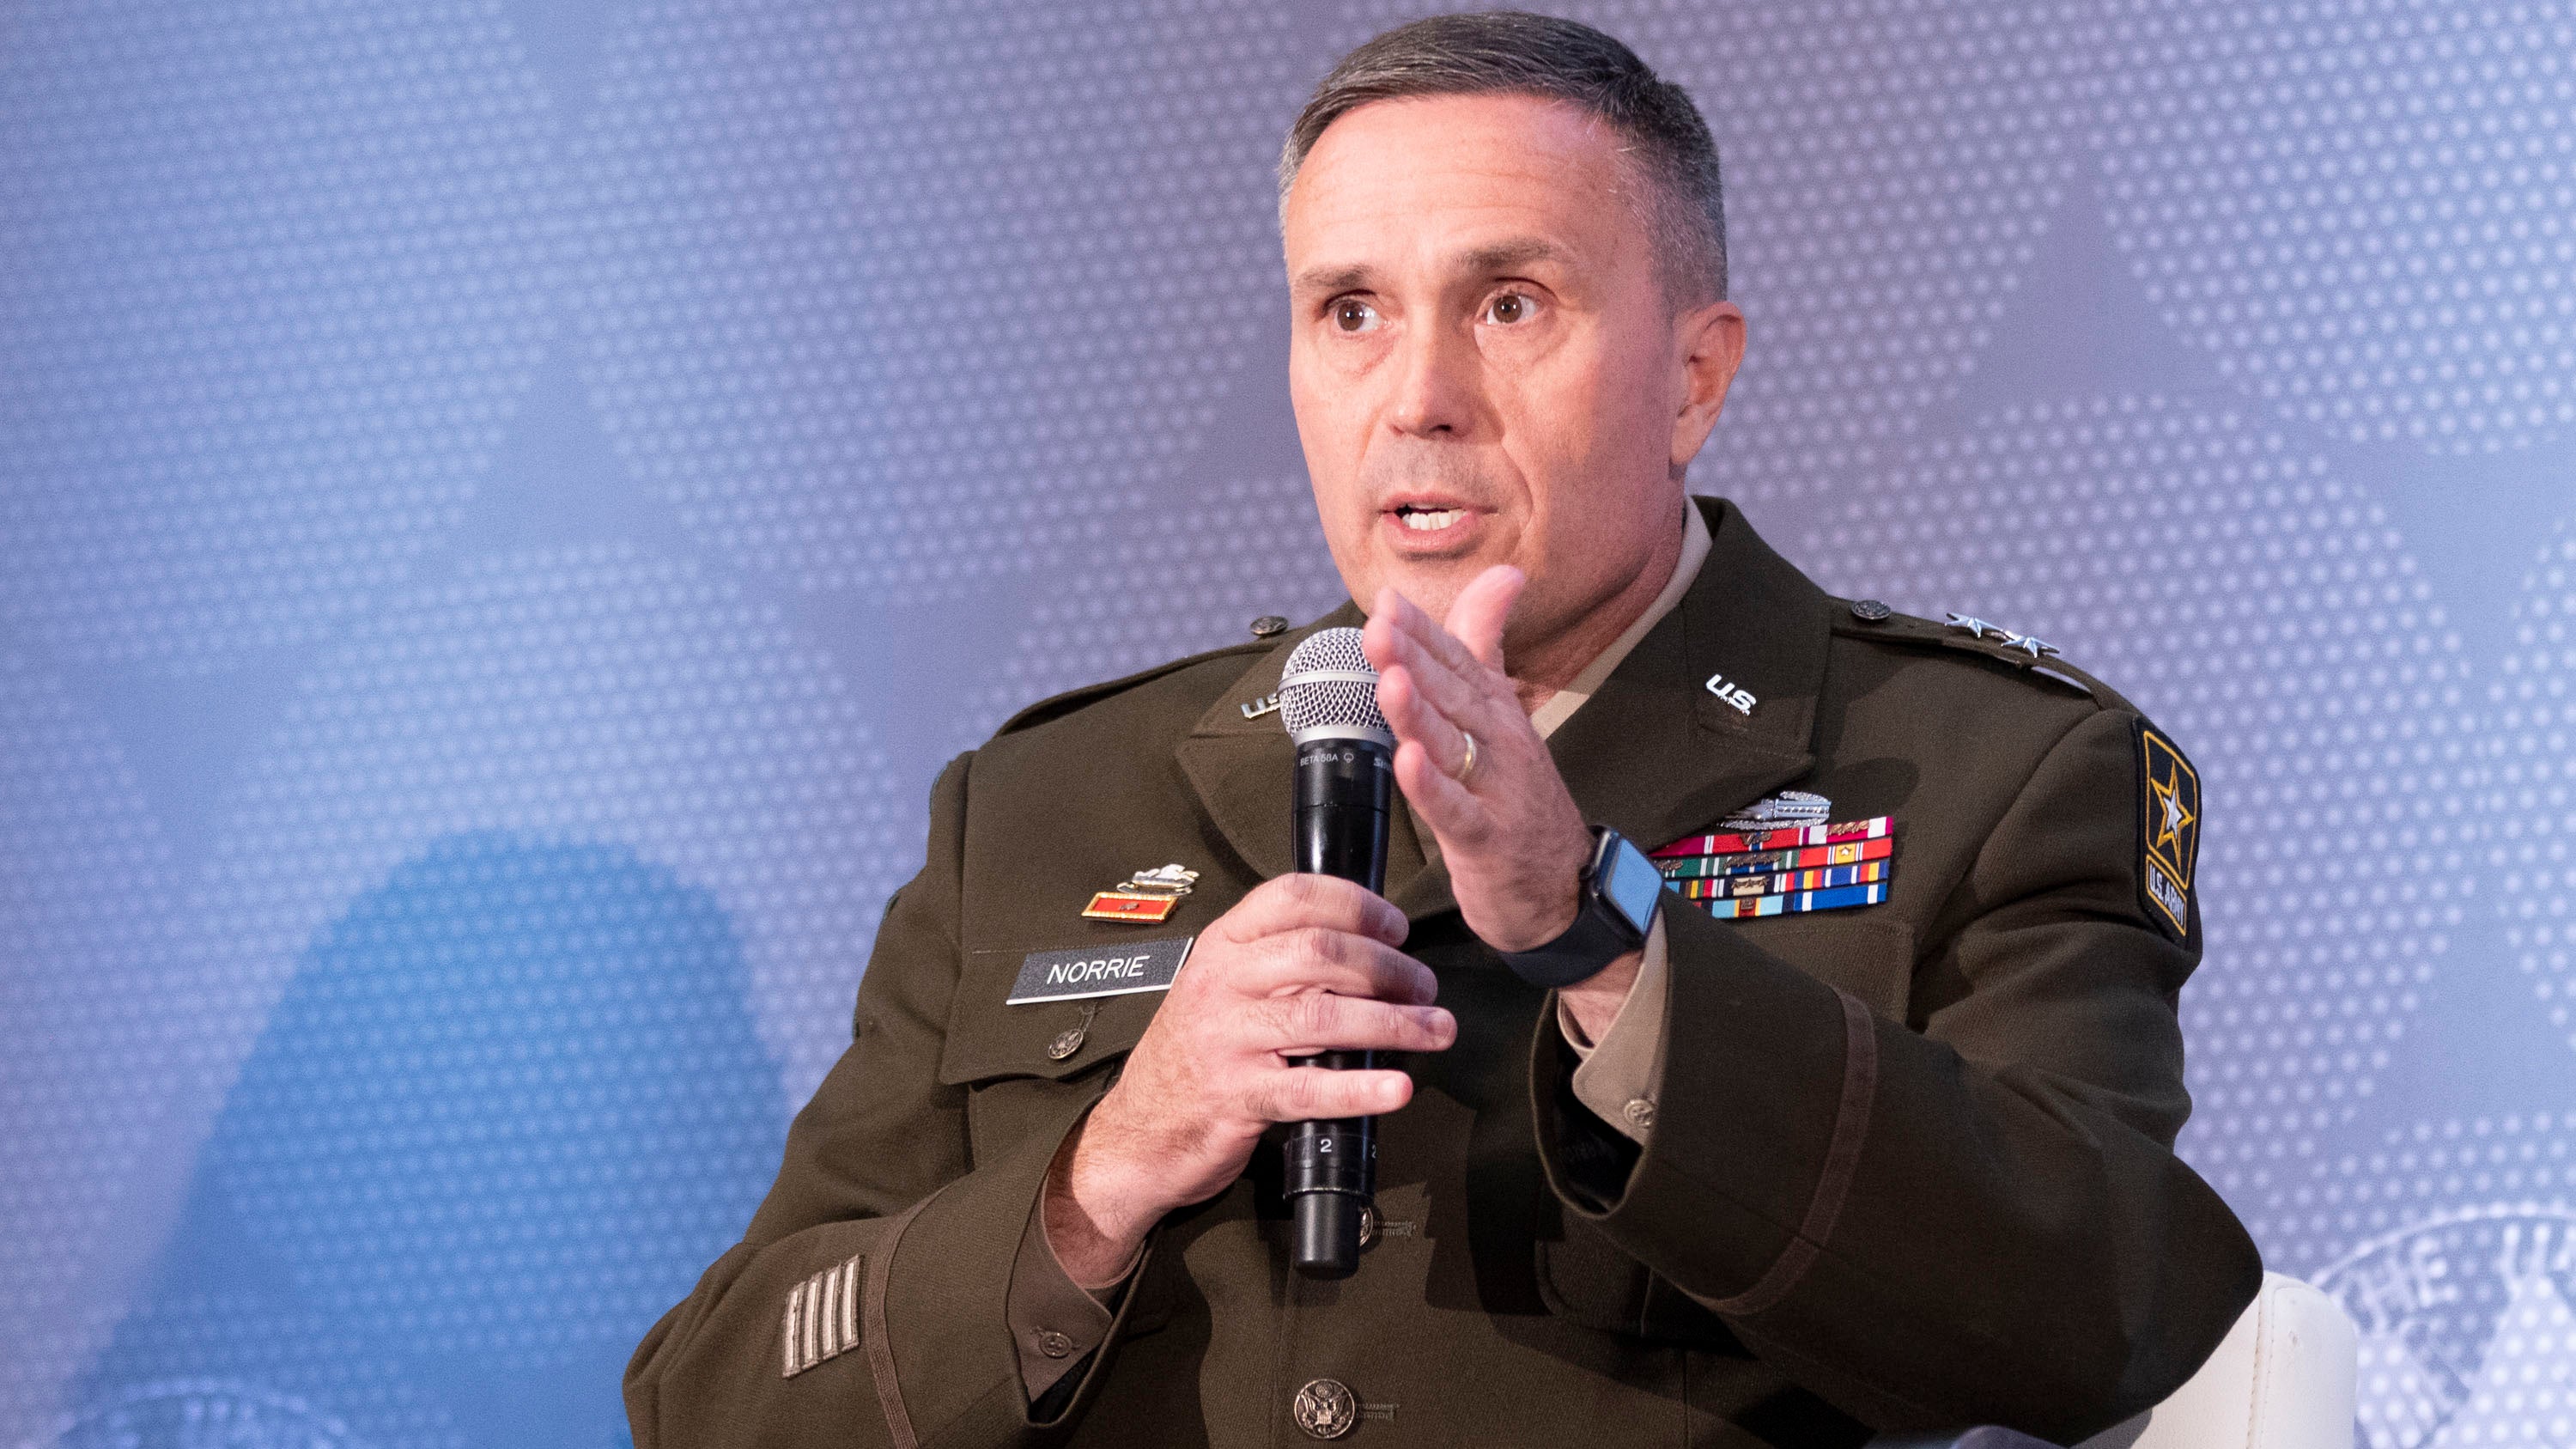 Maj. Gen. Christopher Norrie, director of the People First Task Force, speaks during the AUSA Contemporary Military Forum: People First at the AUSA 2022 Annual Meeting in Washington, D.C., Monday, Oct. 10, 2022. (Tasos Katopodis for AUSA)